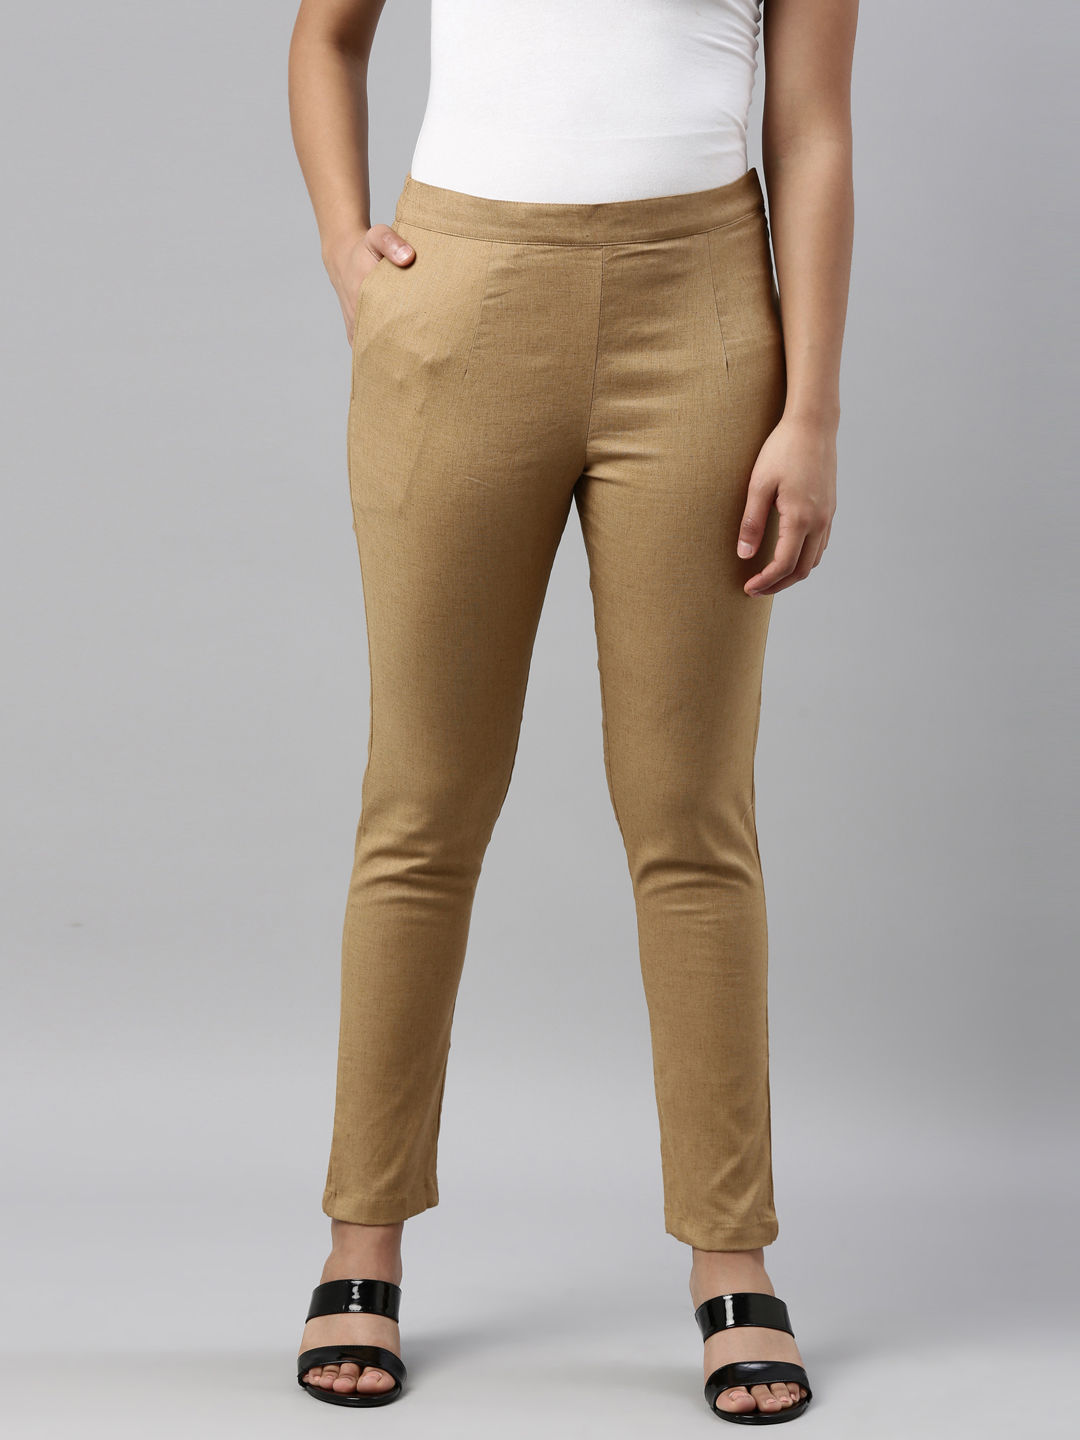 Buy GO COLORS Women Gold Mid Rise Modal Metallic Pant - XL at Amazon.in